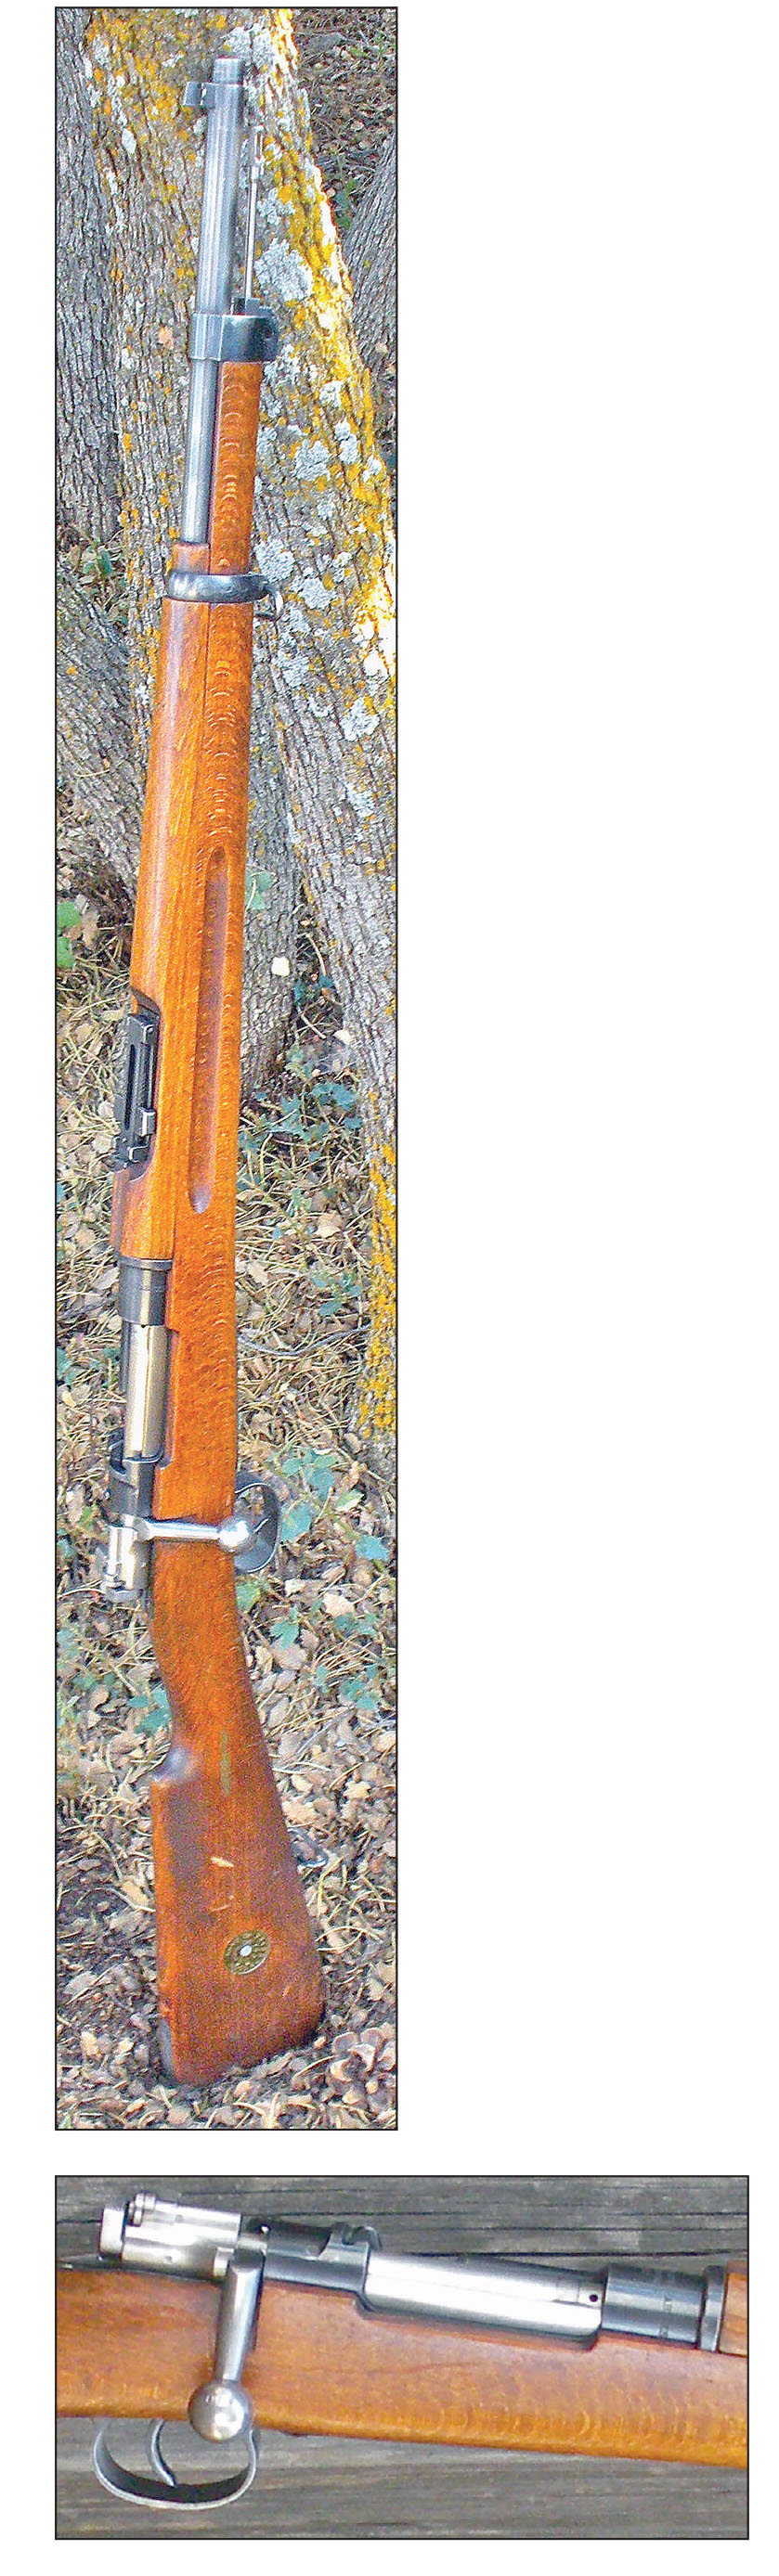 This Model 96 6.5x55 Short Rifle manufactured by Husqvarna Vapenfabriks Aktiebolag in 1942 is one of three rifles Dave purchased in the early 1990s. If it and the other two saw use during World War II, they don’t show it.